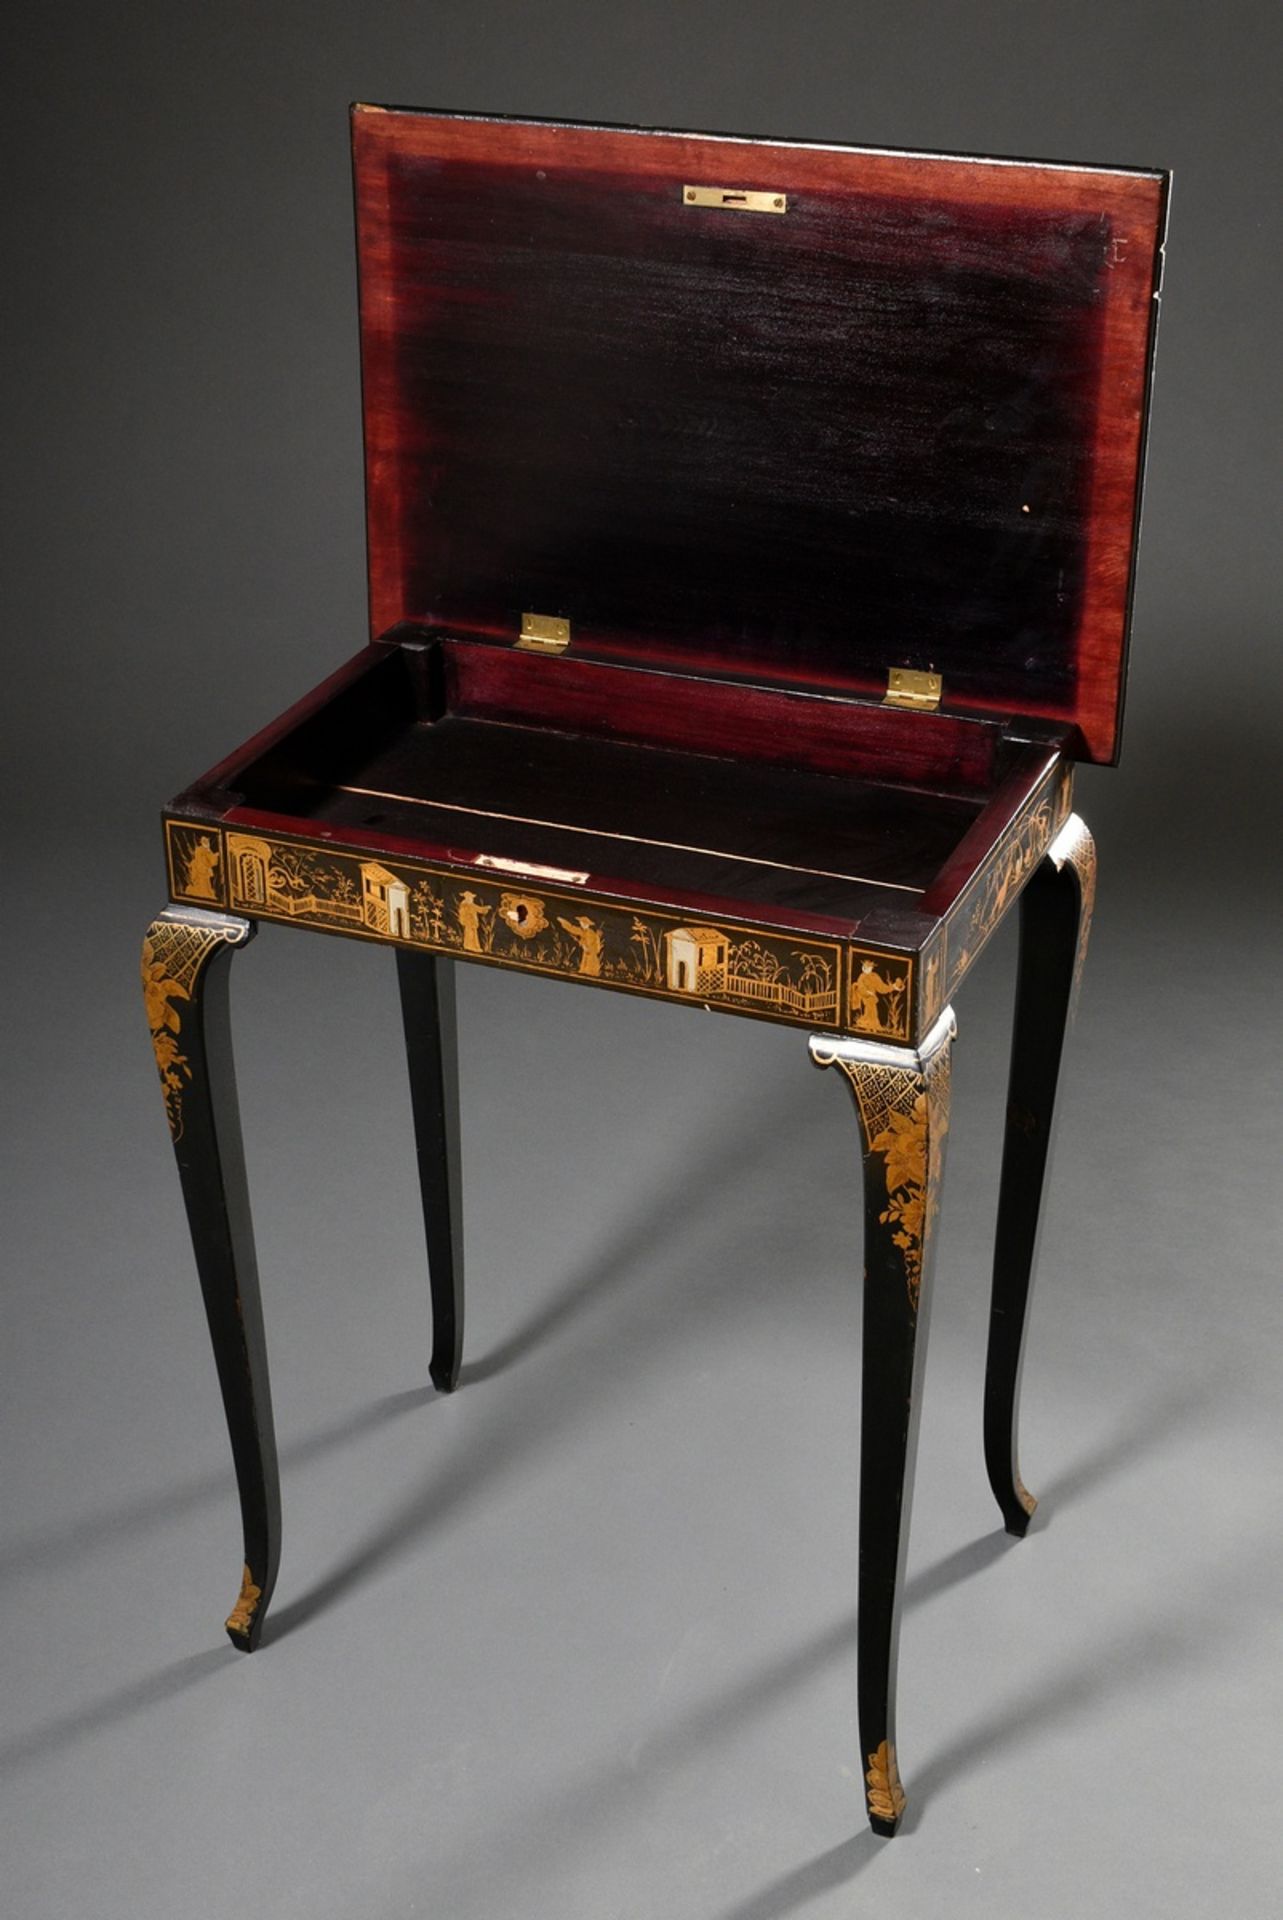 Decorative sewing table with chinoiserie decoration on a black background in lacquer painting, larg - Image 2 of 7